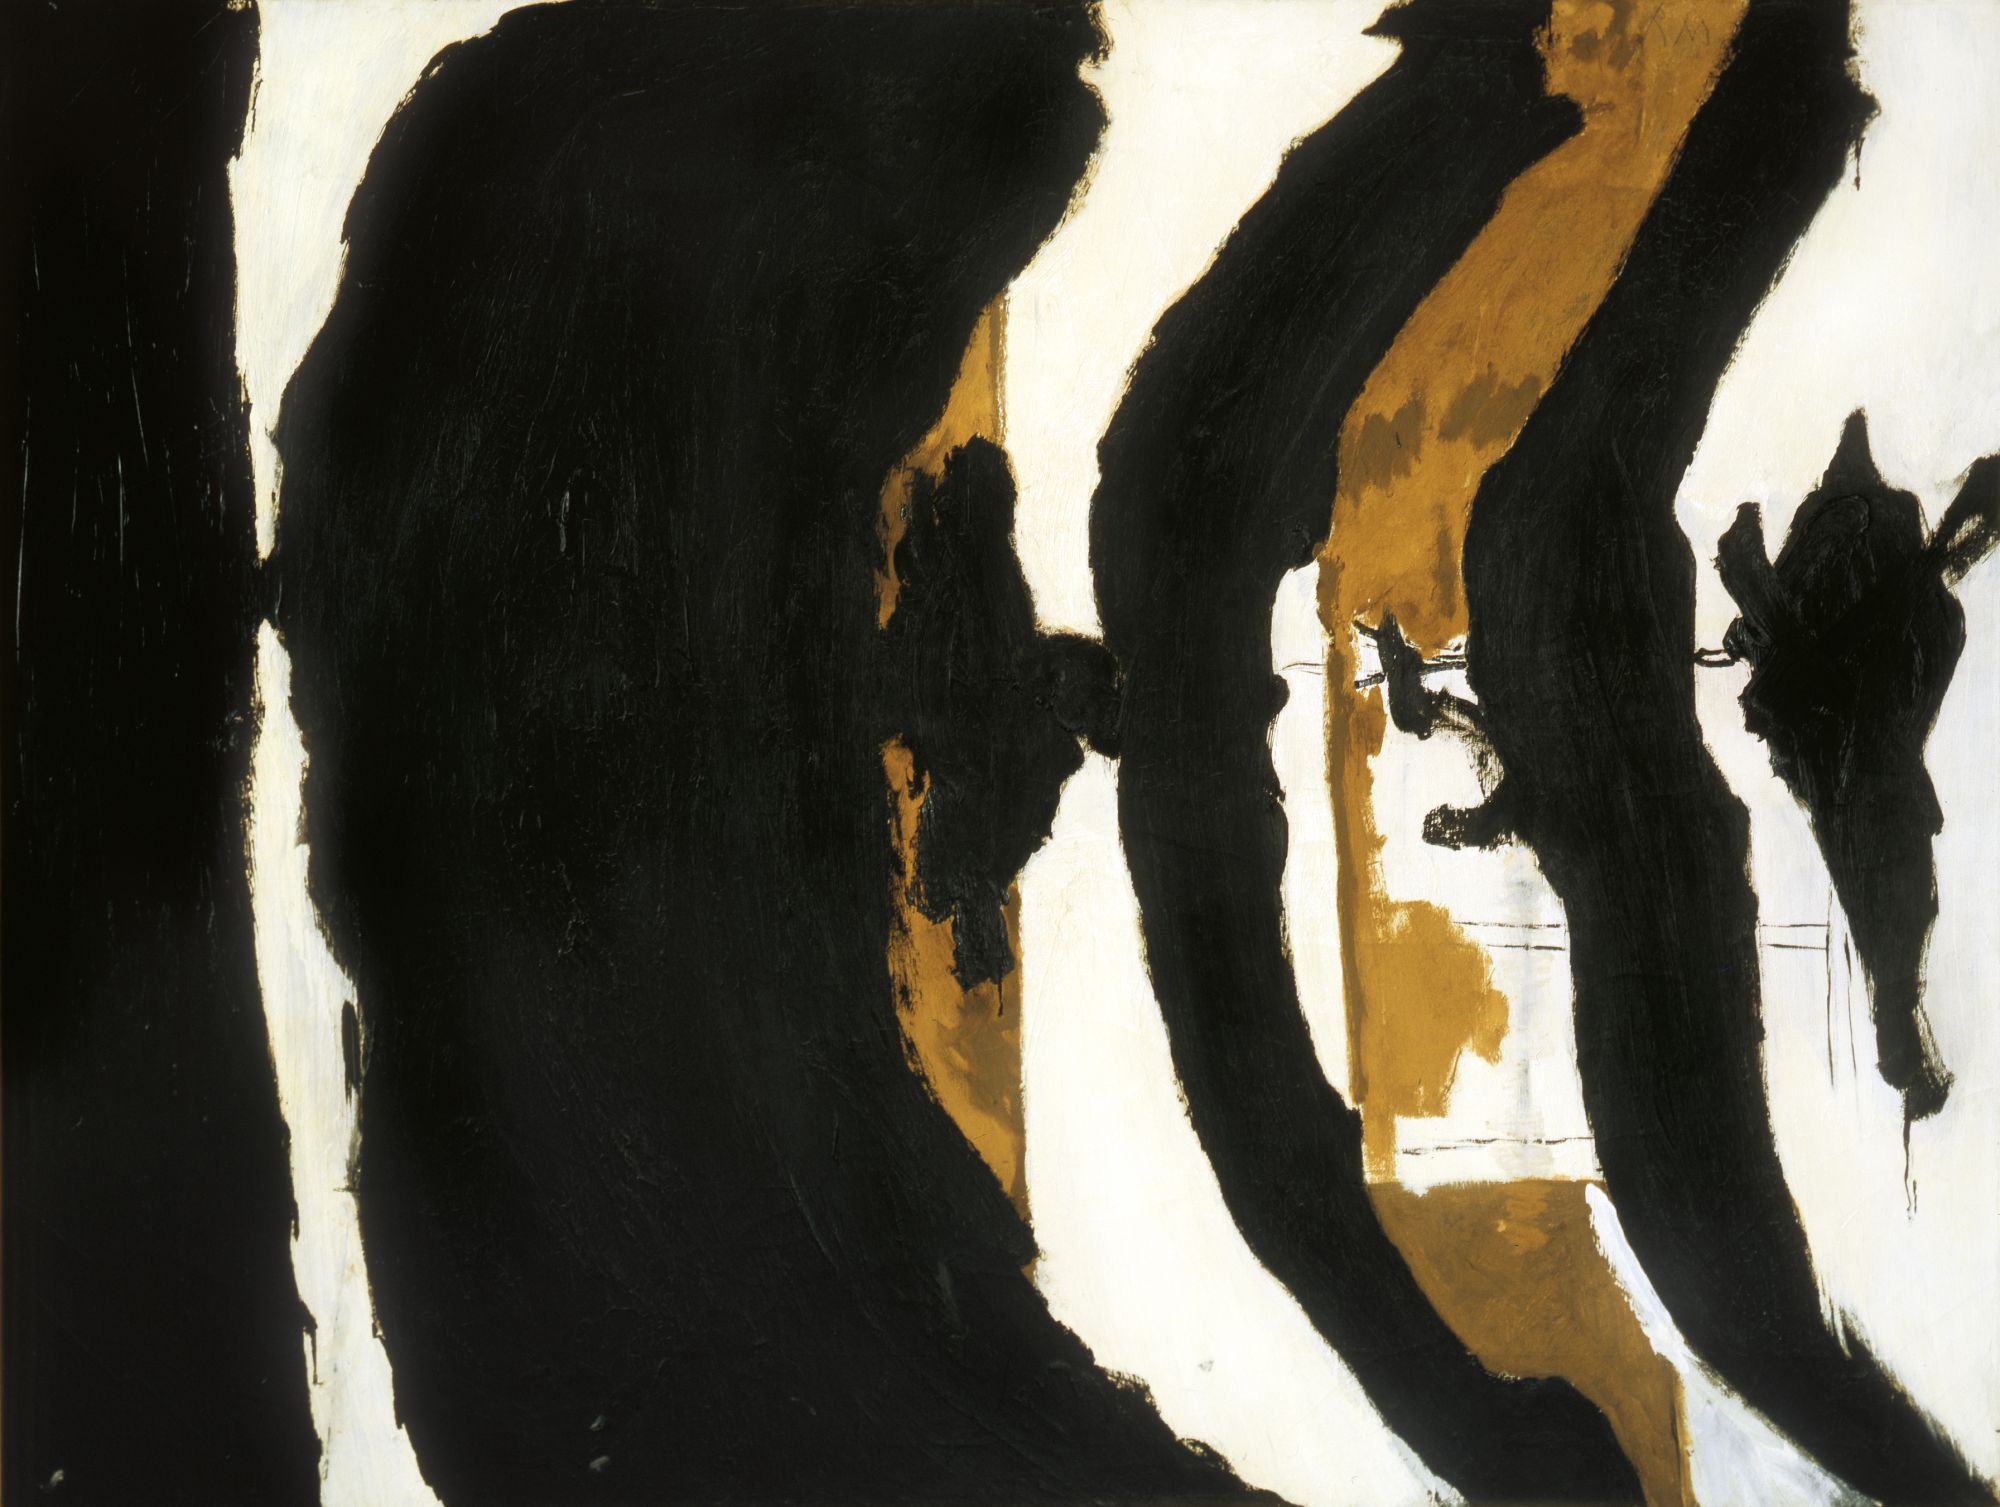 Wall Painting No. III, 1953, oil on canvas, 54 1/2 ✕ 72 1/8 in. (138.4 ✕ 183.2 cm)